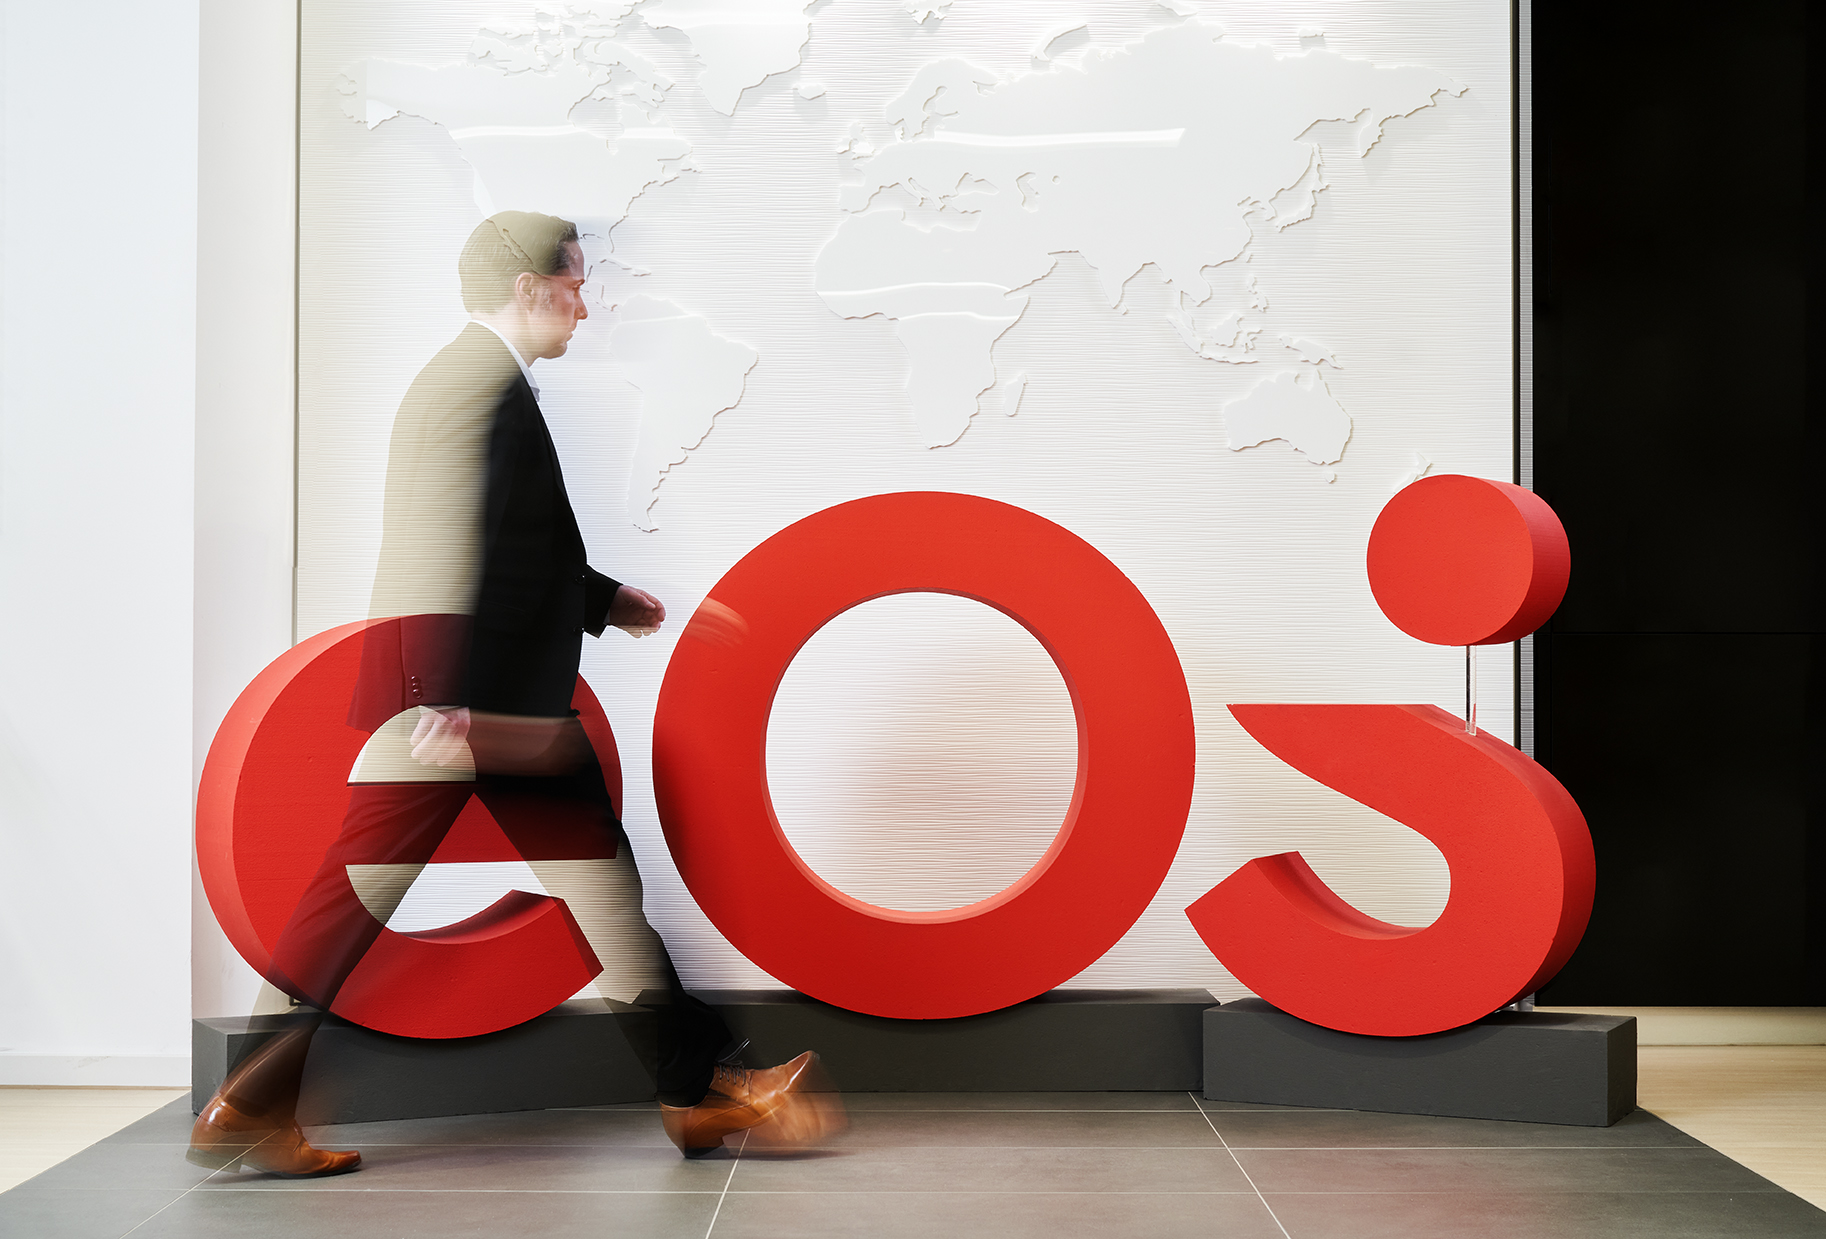 This is the new EOS brand: The new logo adorns the lobby of EOS headquarters.